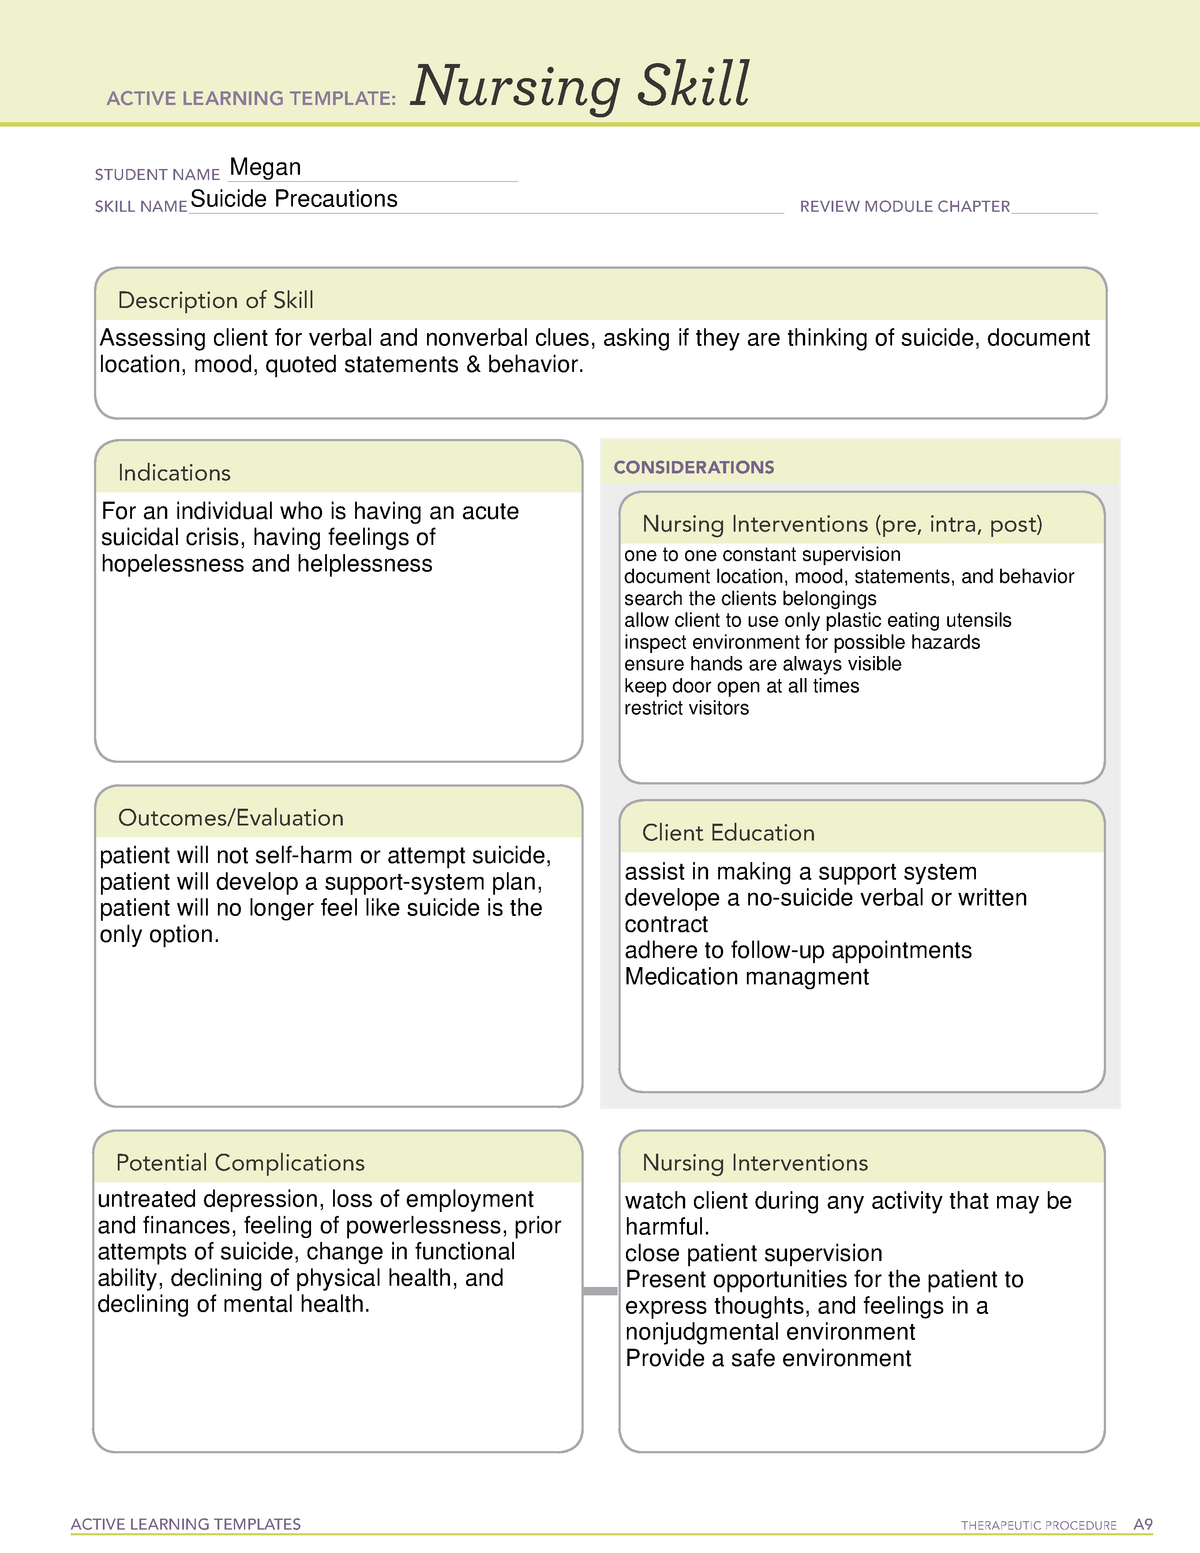 Active Learning Template Nursing Skill form ACTIVE LEARNING TEMPLATES